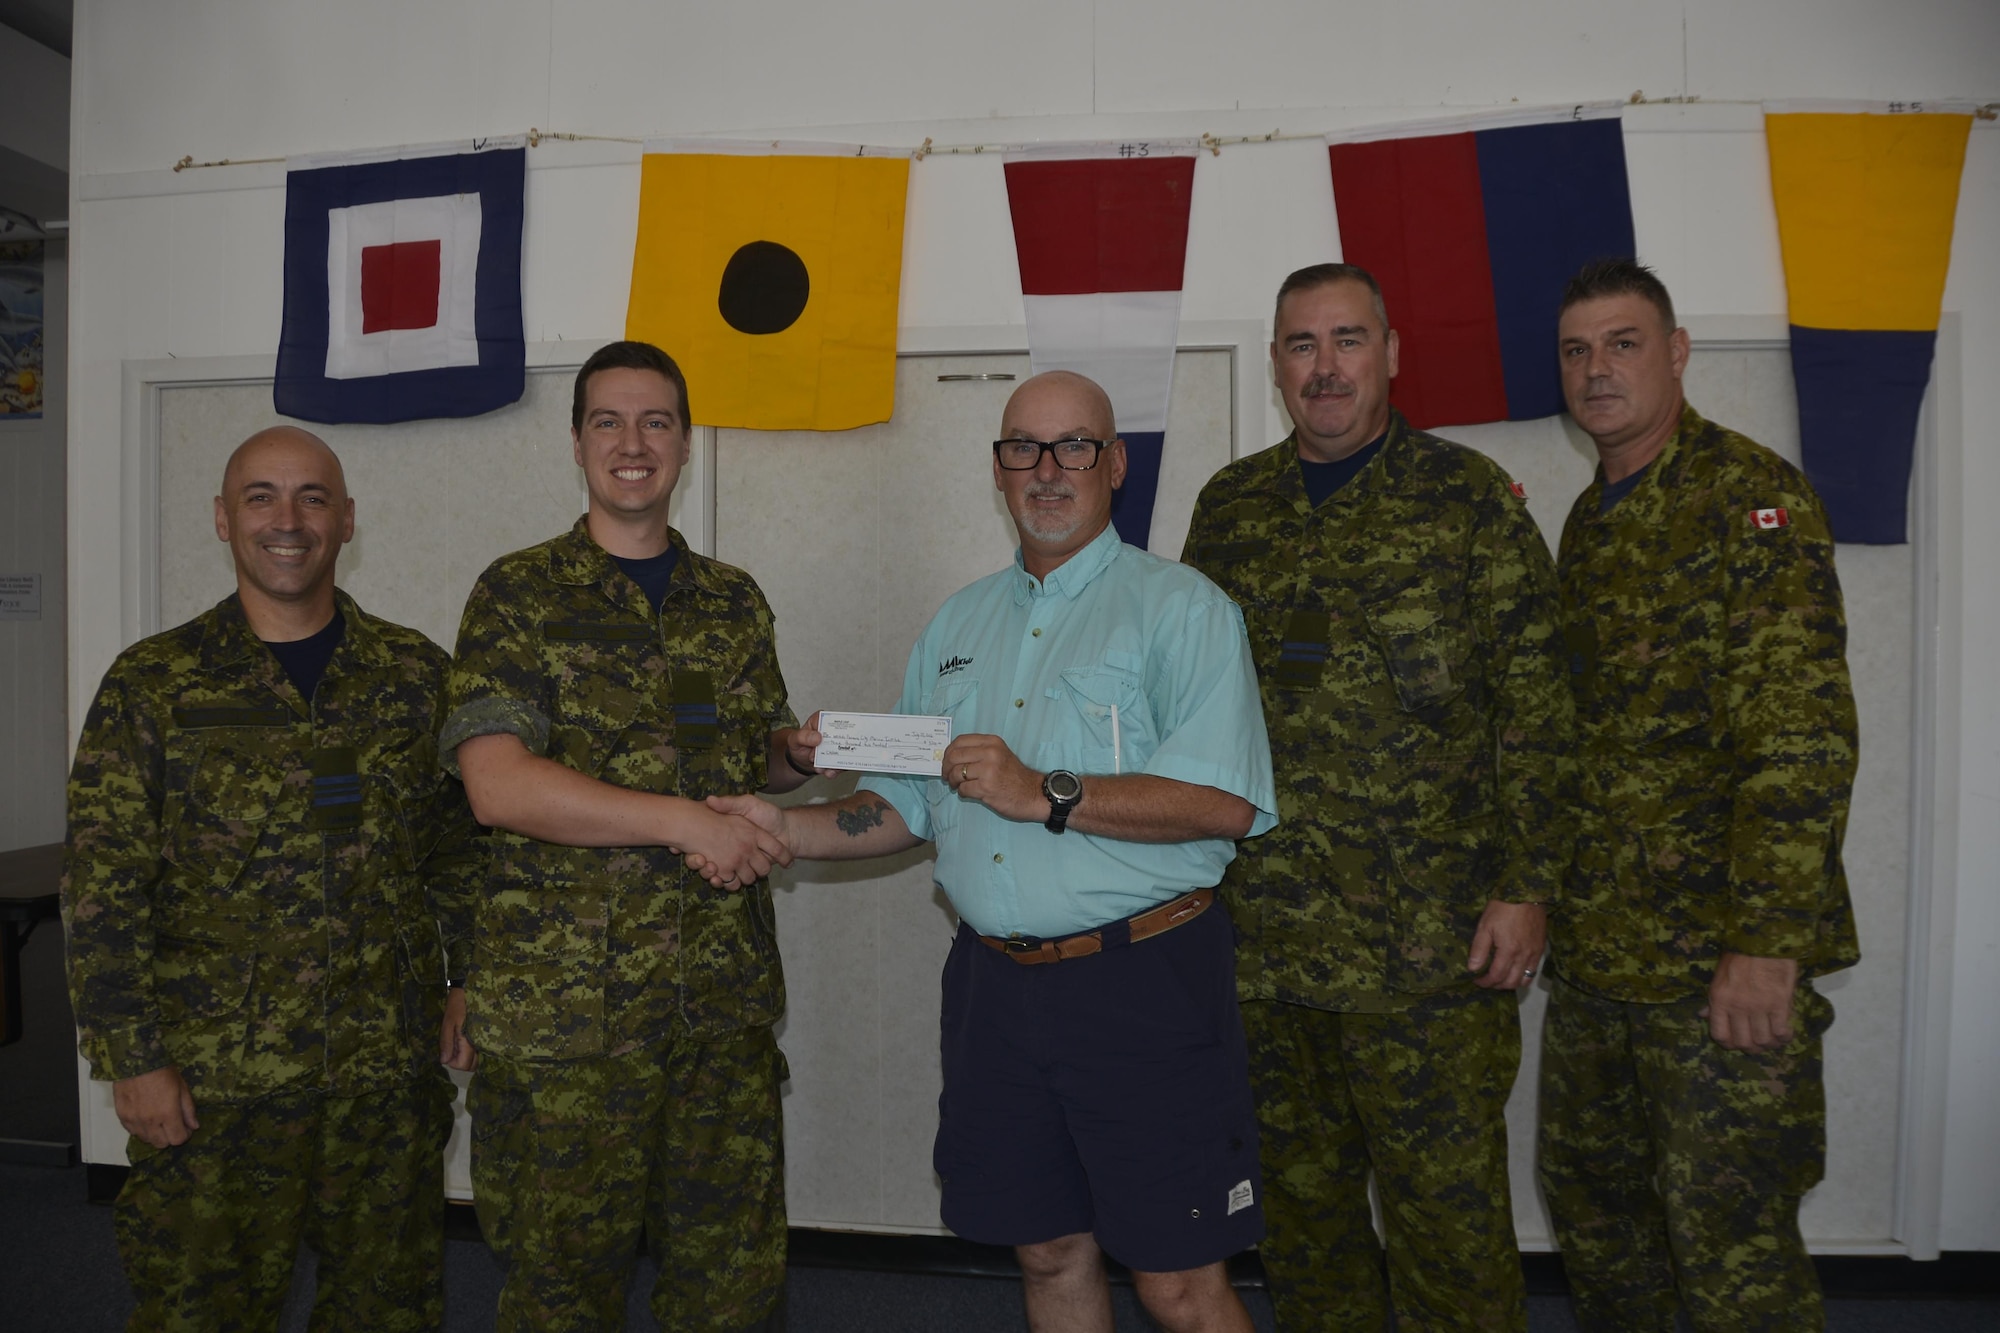 Royal Canadian Air Forces Capt Tim Pistun, 101st Aerospace Communications Squadron, presents the check on behalf of the Canadian Element North American Aerospace Defense Command for $3200 to Ron Boyce, AMIkids Panama City Marine Institute Executive Director July 25 at the PMCI office. Also in attendance were, from left, Maj Dan Ceniccola, 101st ACOMS; Capt Mike MacNeil, 10st ACOMS and WO Darren Guitard, Assessments, Lessons Learned and Exercises Directorate. The funds were raised during the Canadian Element’s annual Canadian American Golf Tournament, an annual activity they hold to benefit a local community charity each year. (U.S. Air Force photo by Mary McHale)